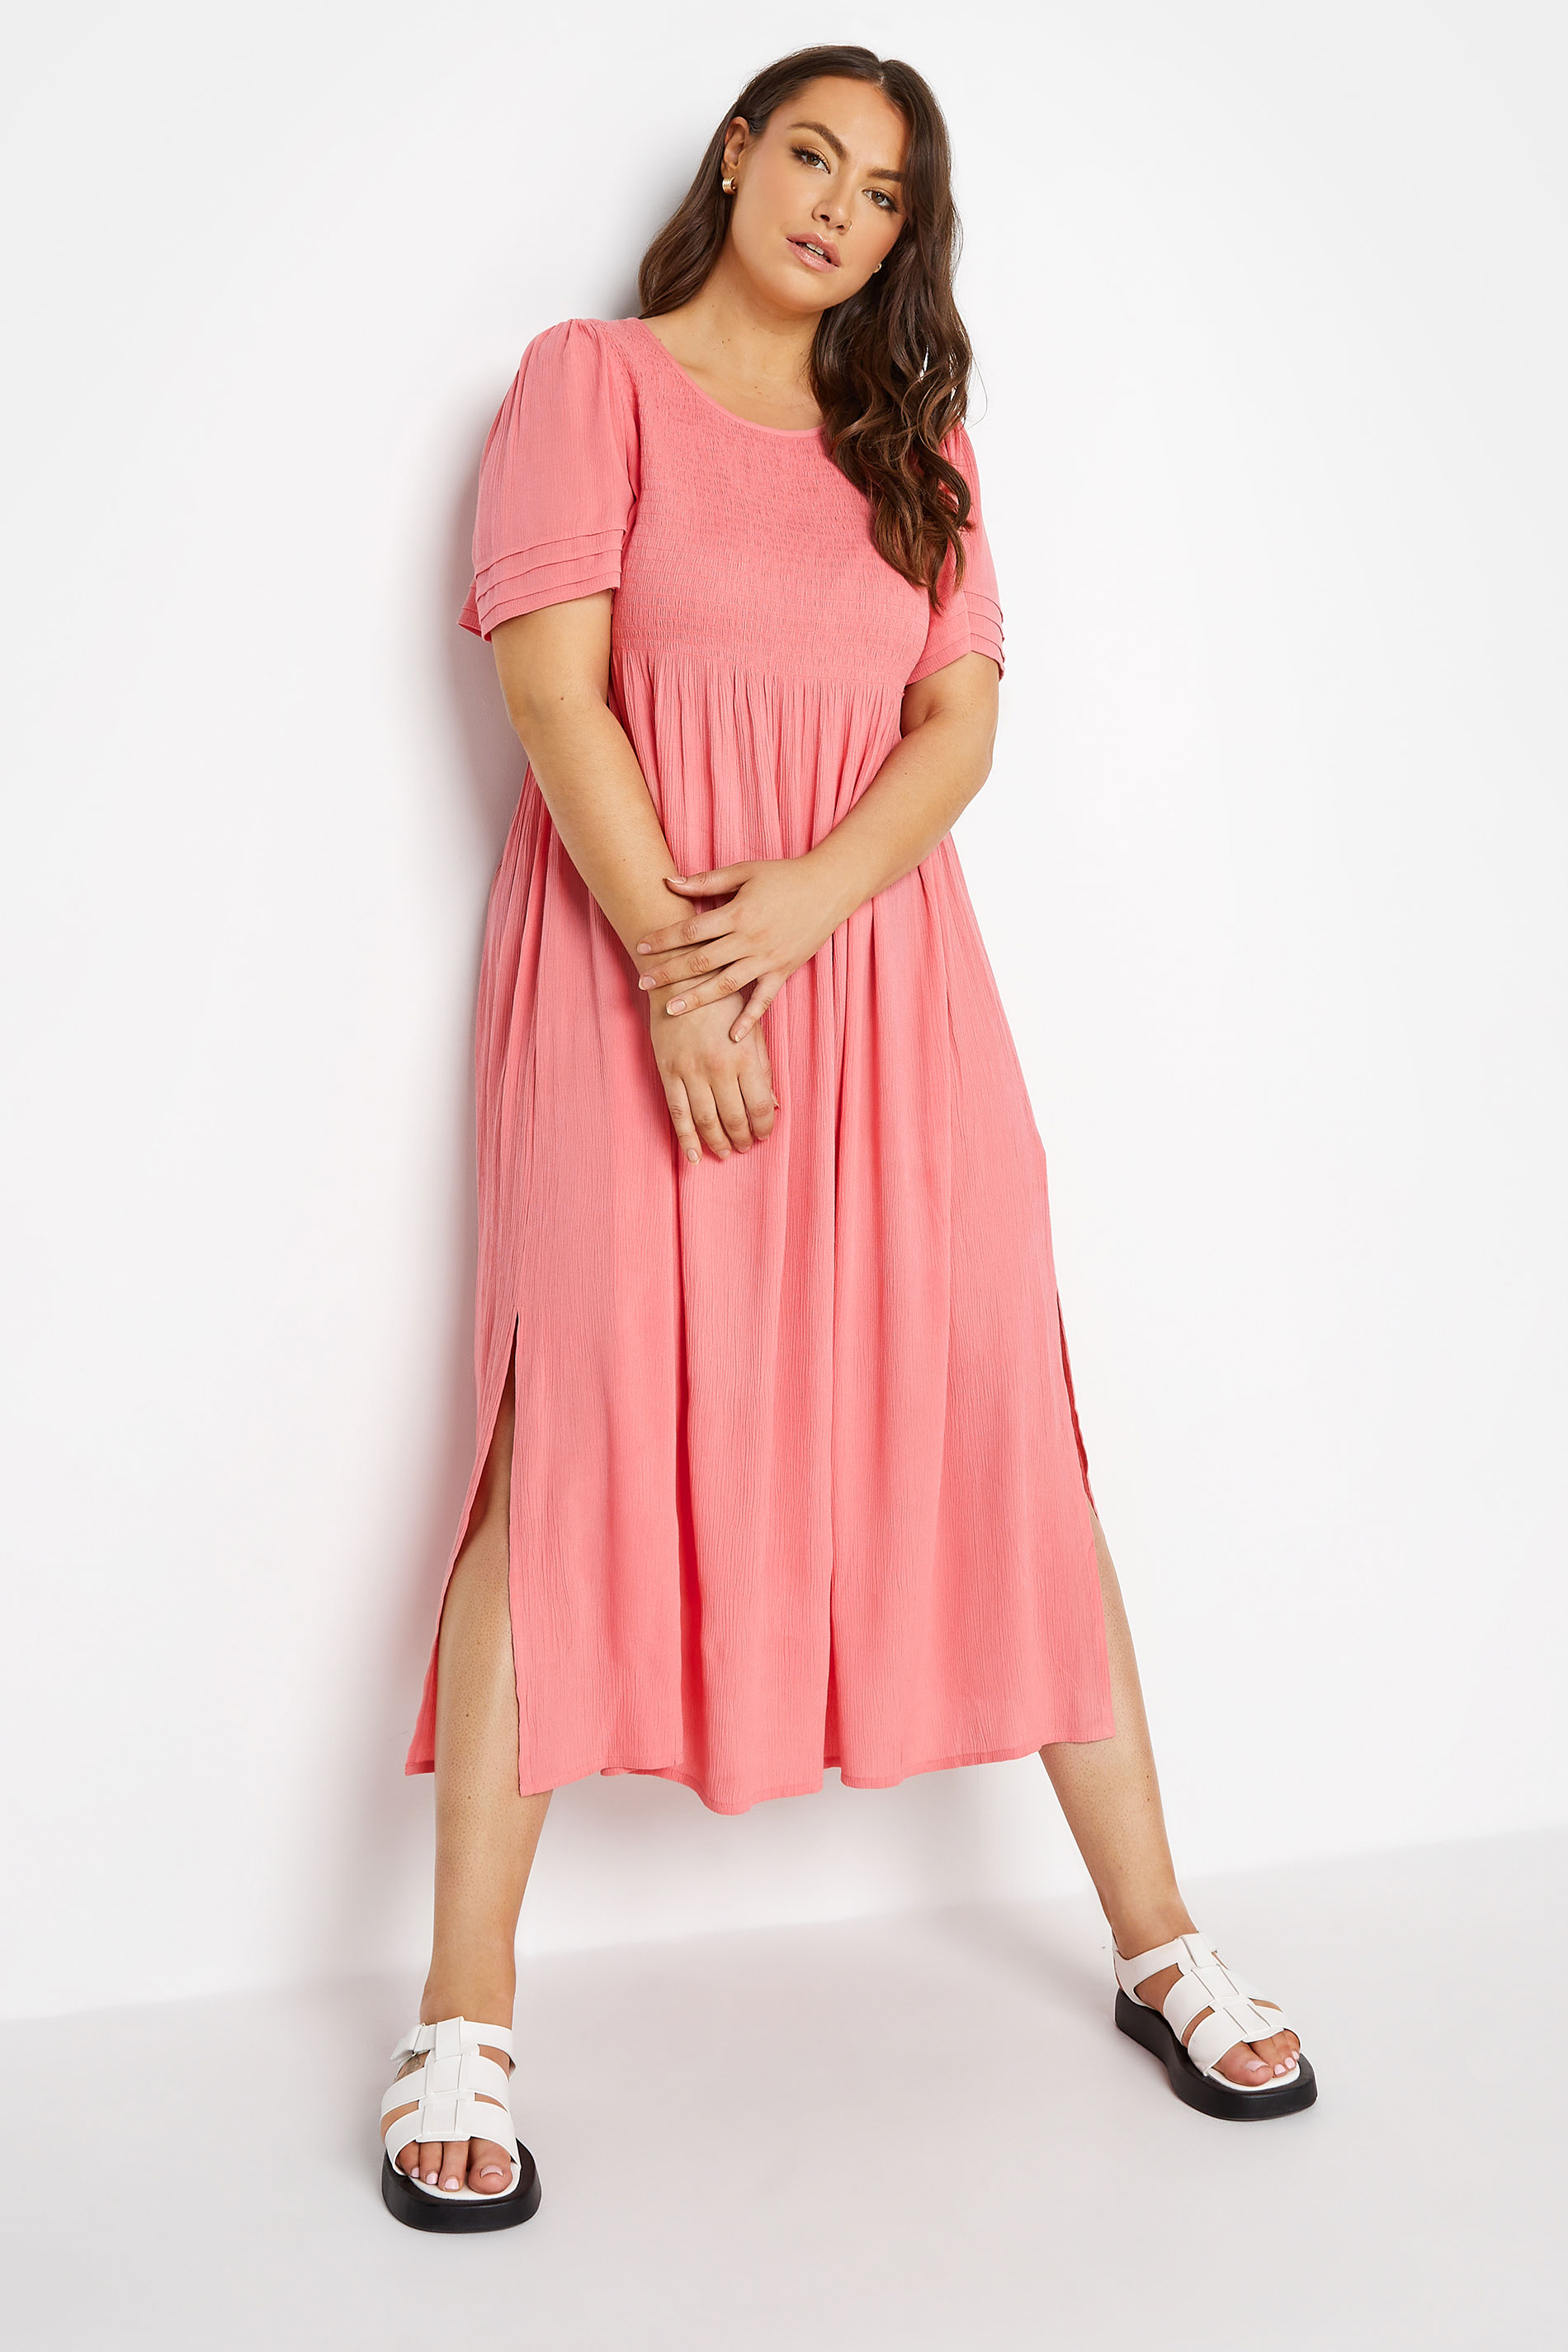 Robes Grande Taille Grande taille  Robes dÉté | LIMITED COLLECTION - Robe Rose Corail Manches Amples - XH04751